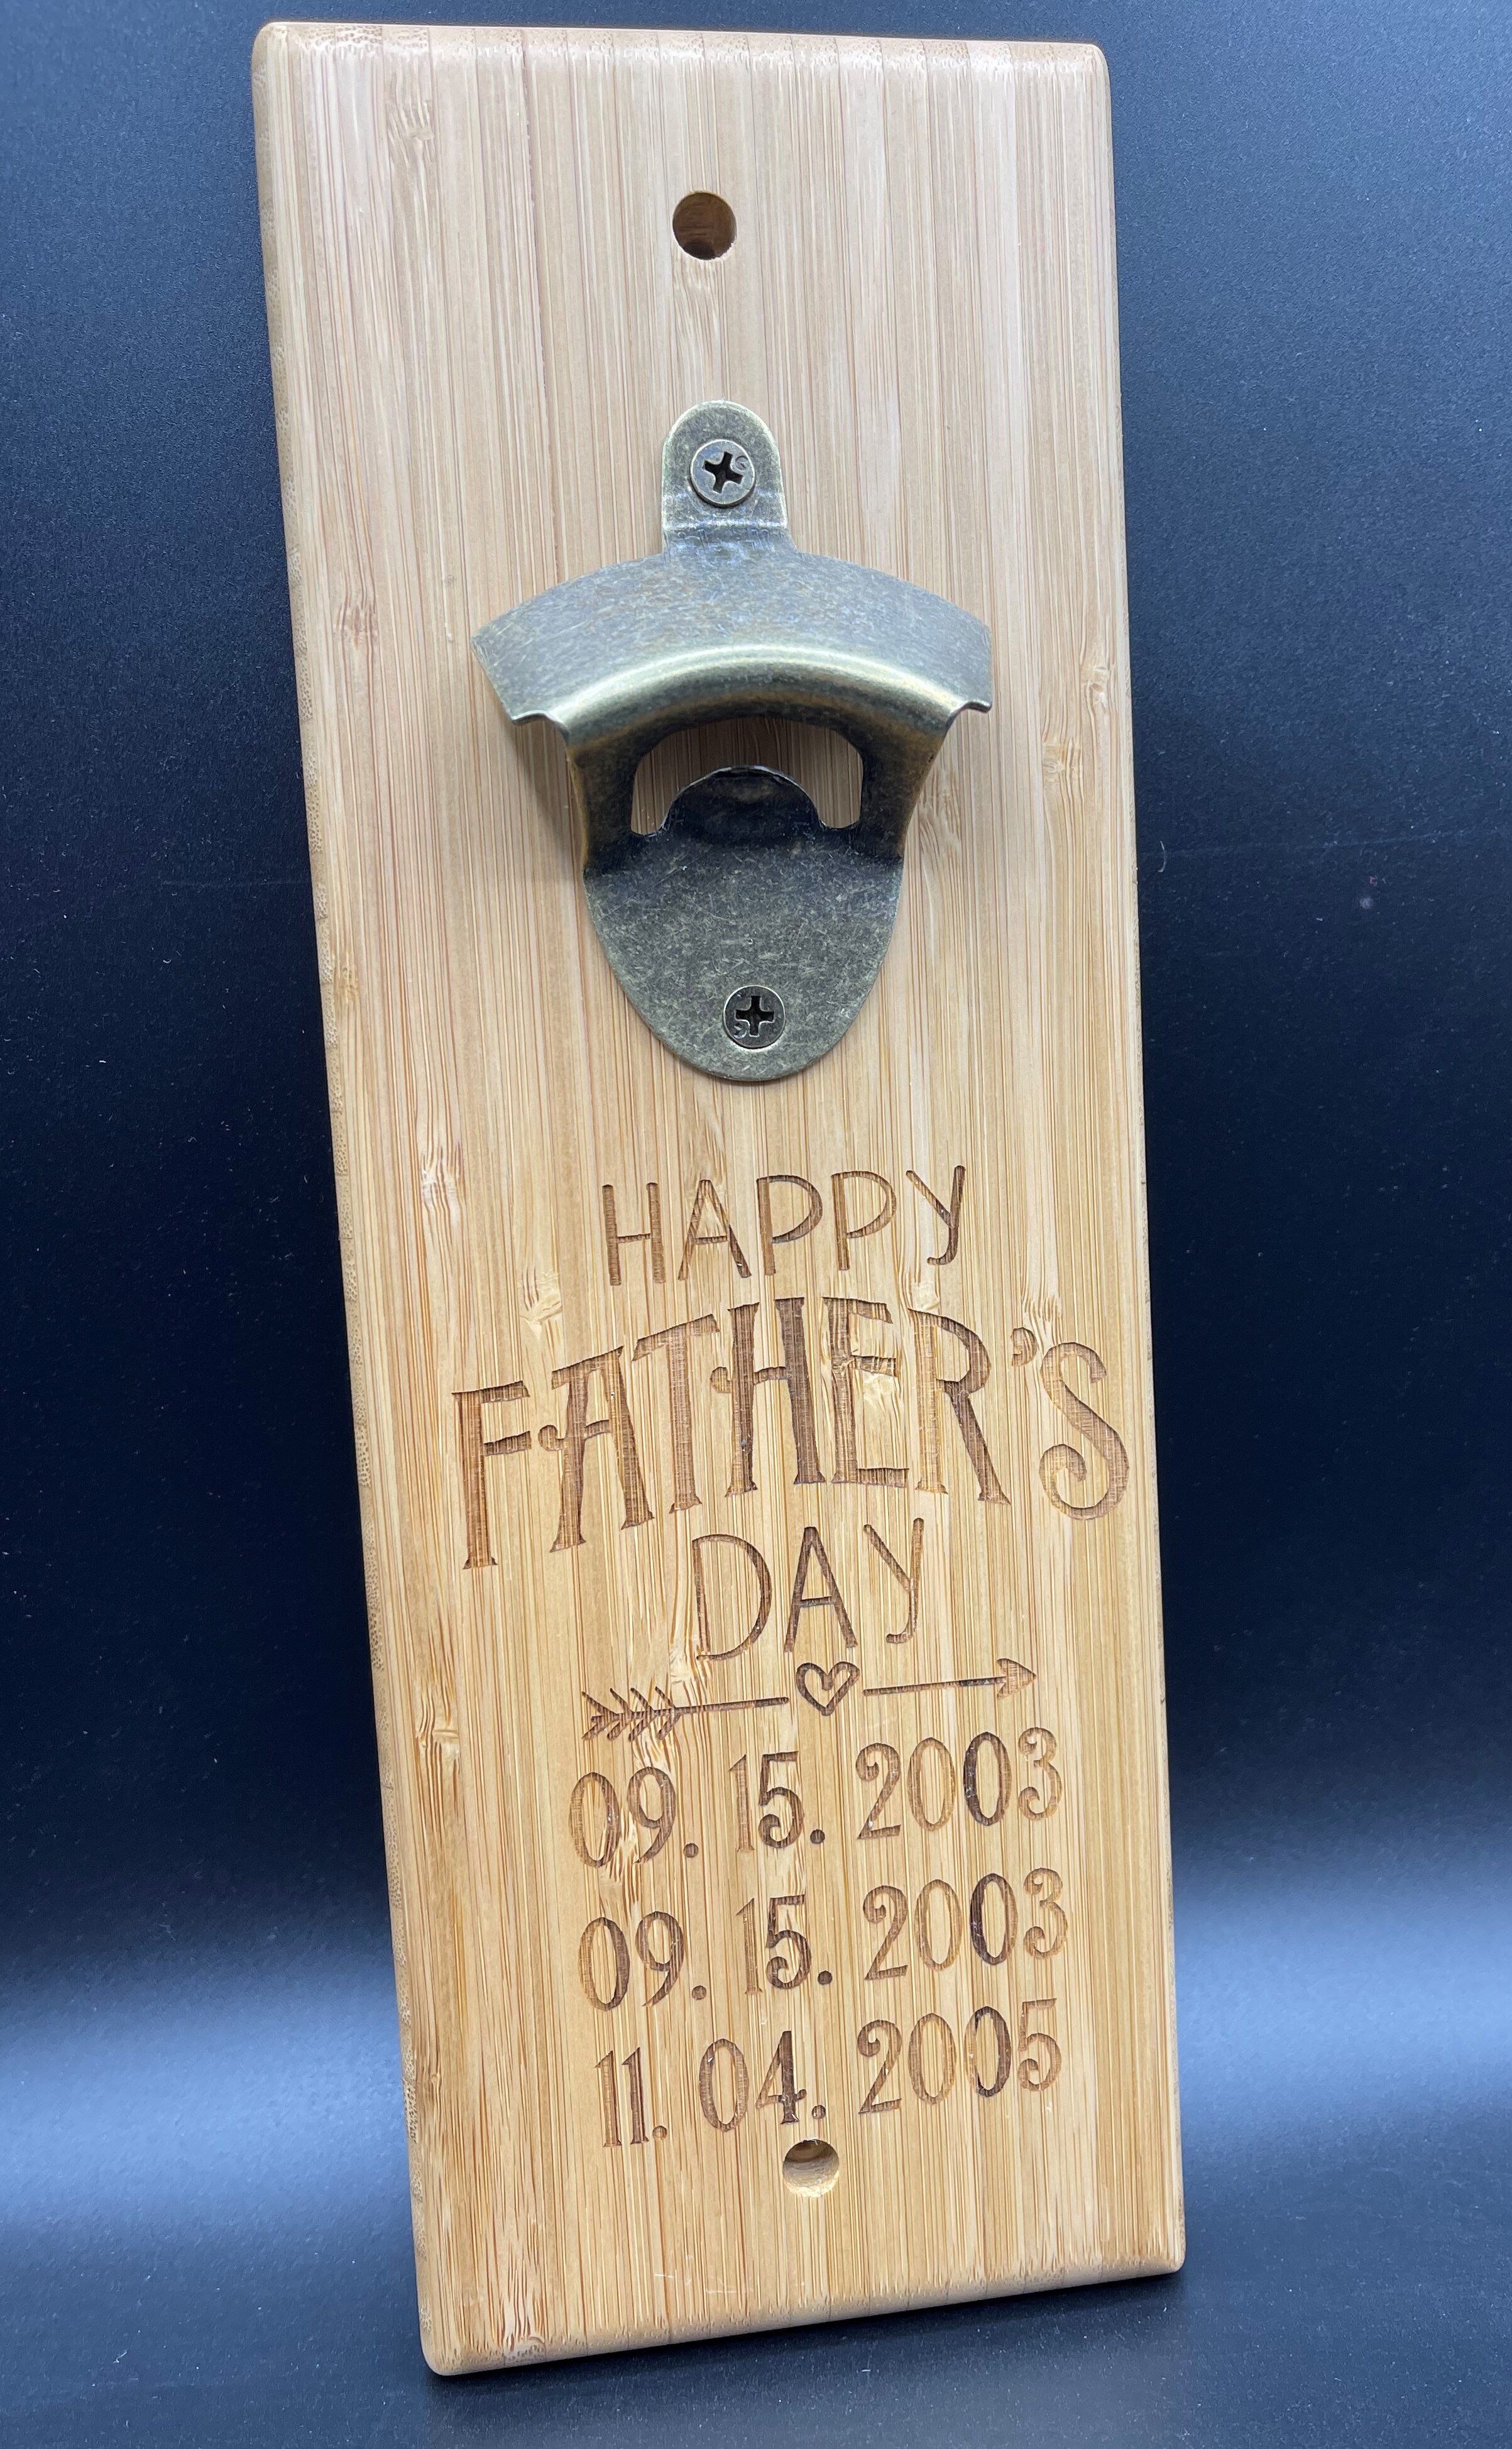 Personalized Wall Mount Bottle Opener Magnetic, Wall Bottle Opener Magnet,  Engraved Wall Mounted Bottle Opener With Magnet, Beer Gift 